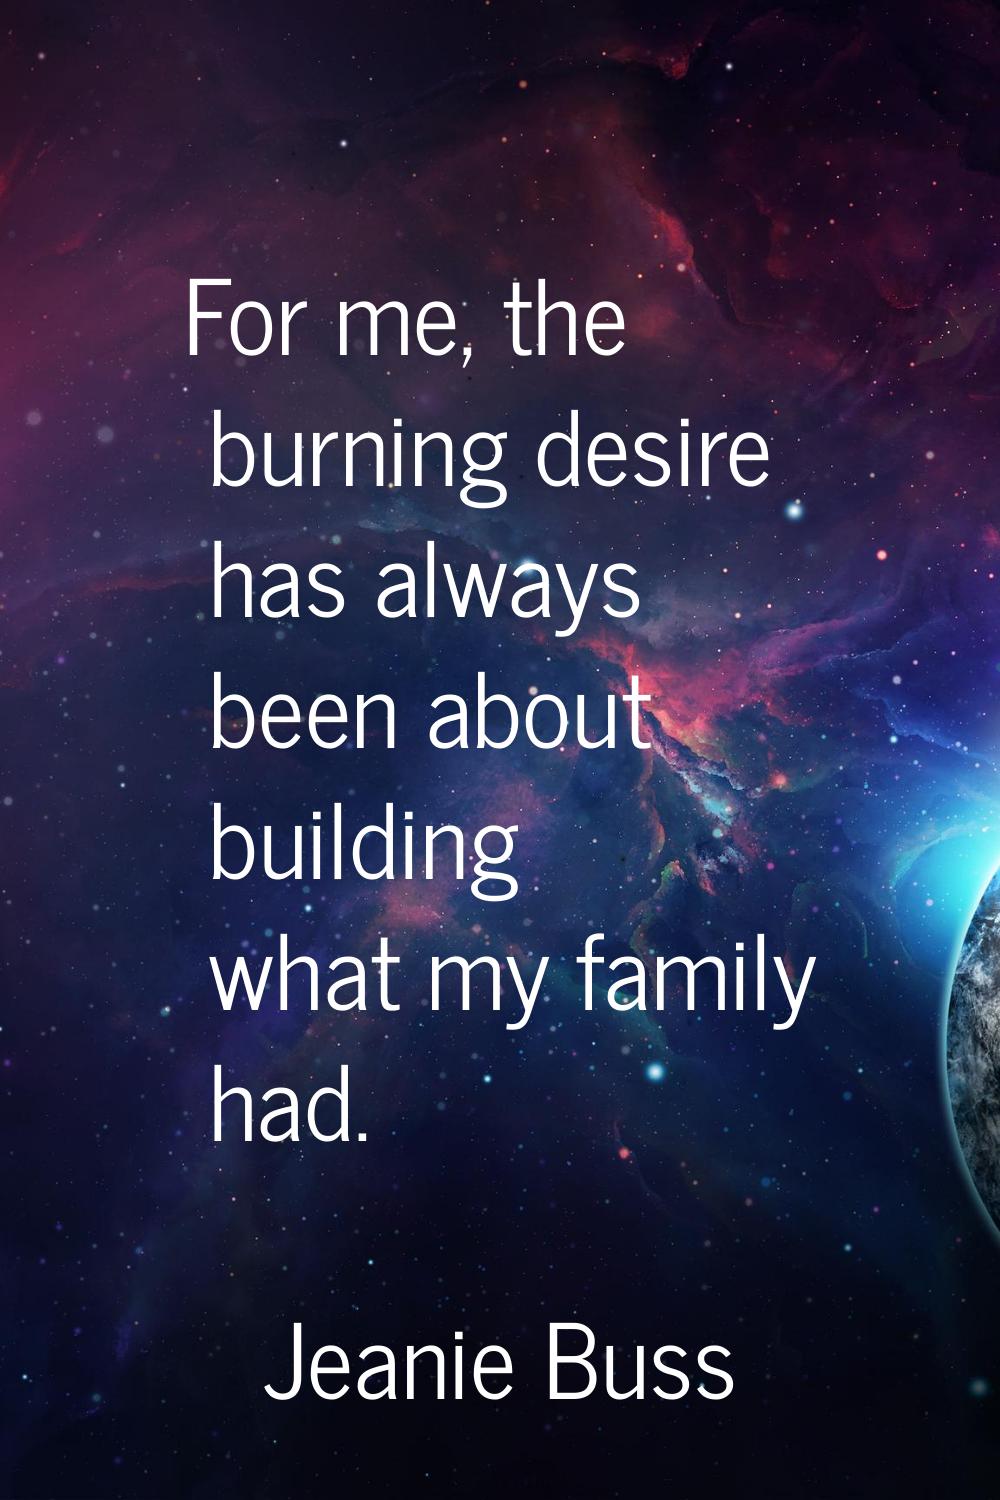 For me, the burning desire has always been about building what my family had.